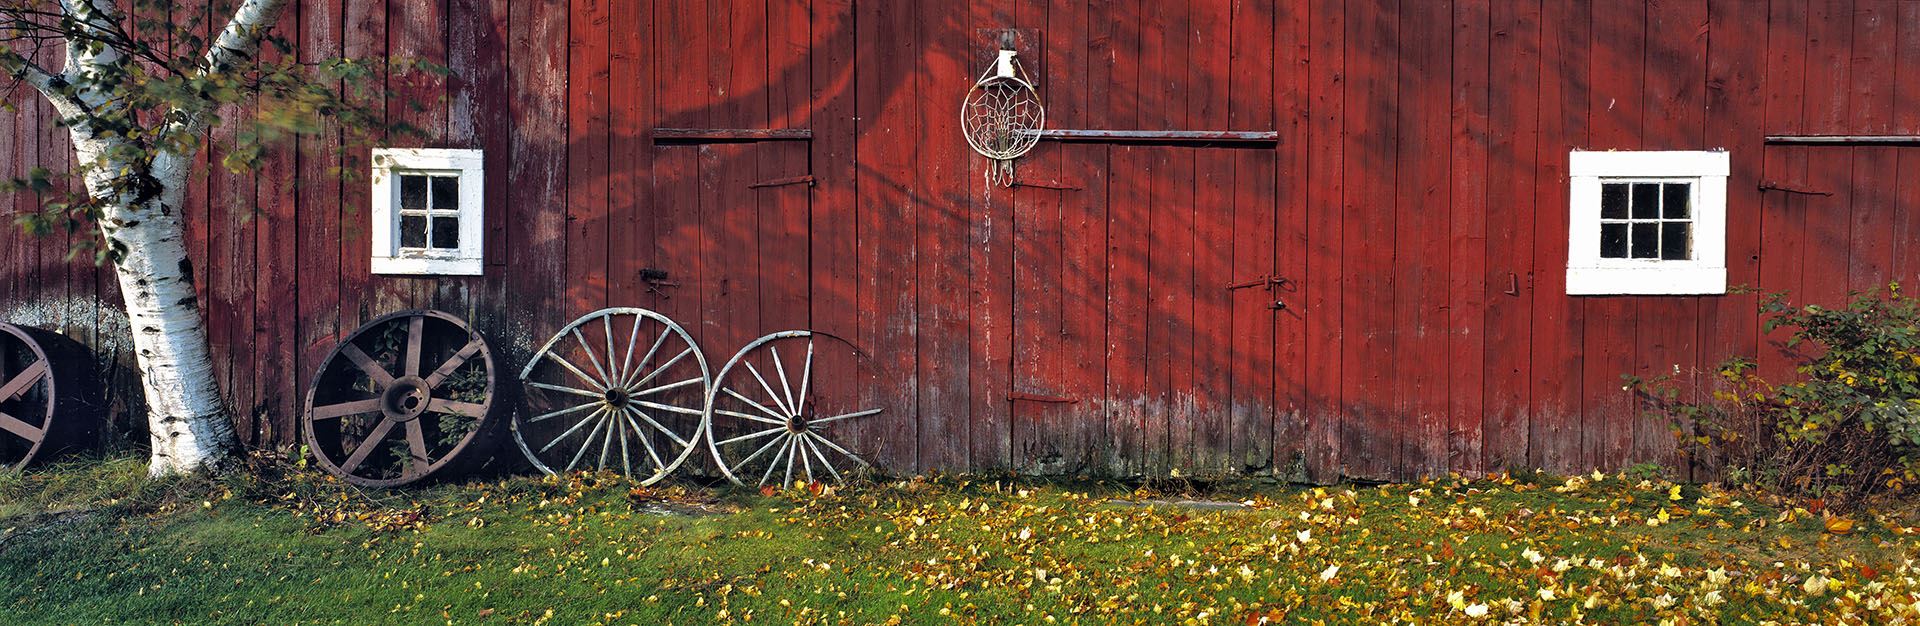 Wooden wagon wheels leaning against a red barn